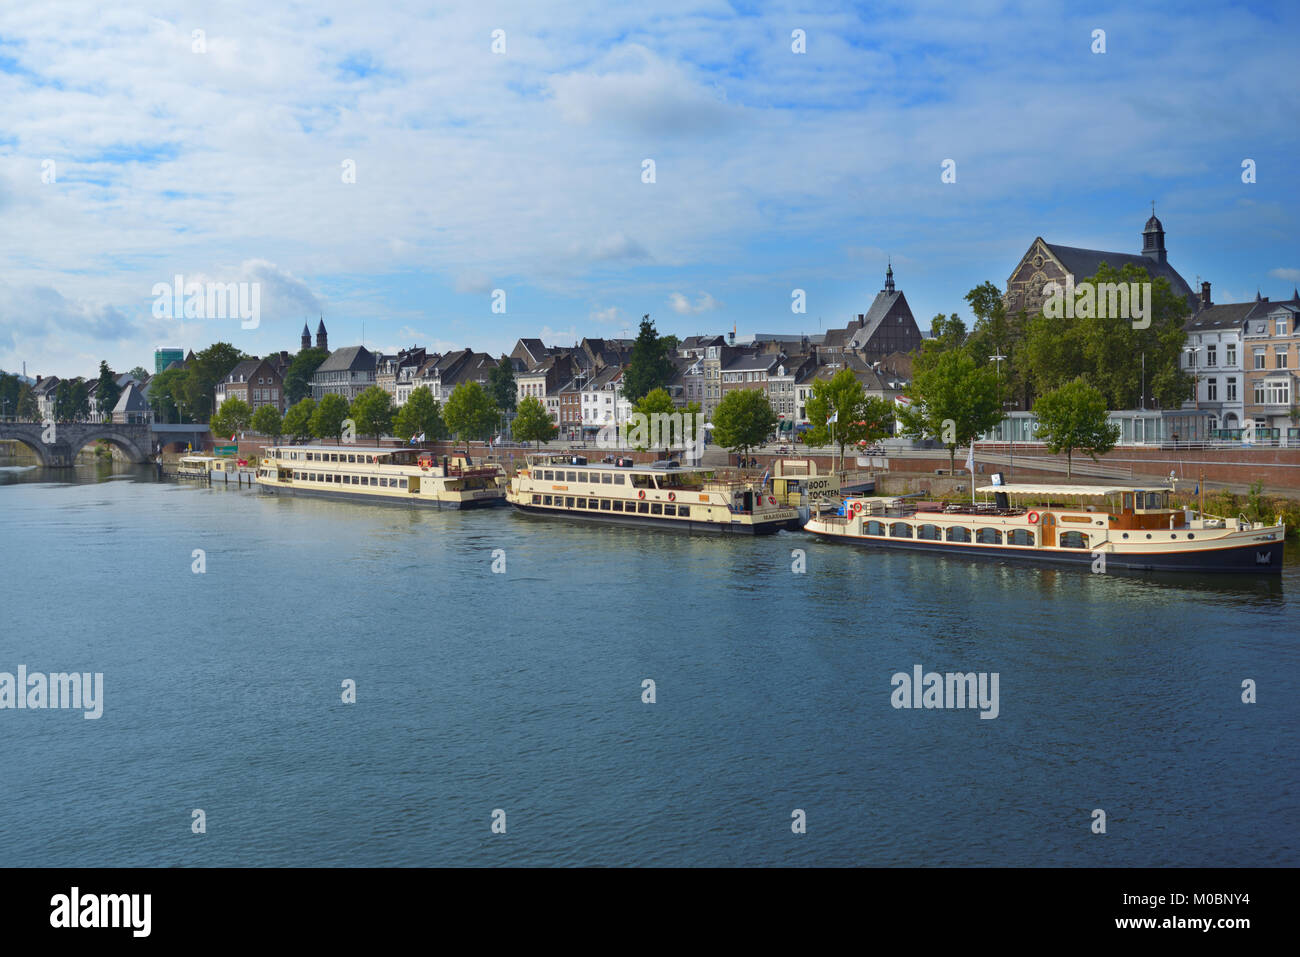 Maastricht, Netherlands - September 8, 2013: Trip boats wait for visitors on the Meuse river near the Roman bridge. Maastricht is considered as the ol Stock Photo